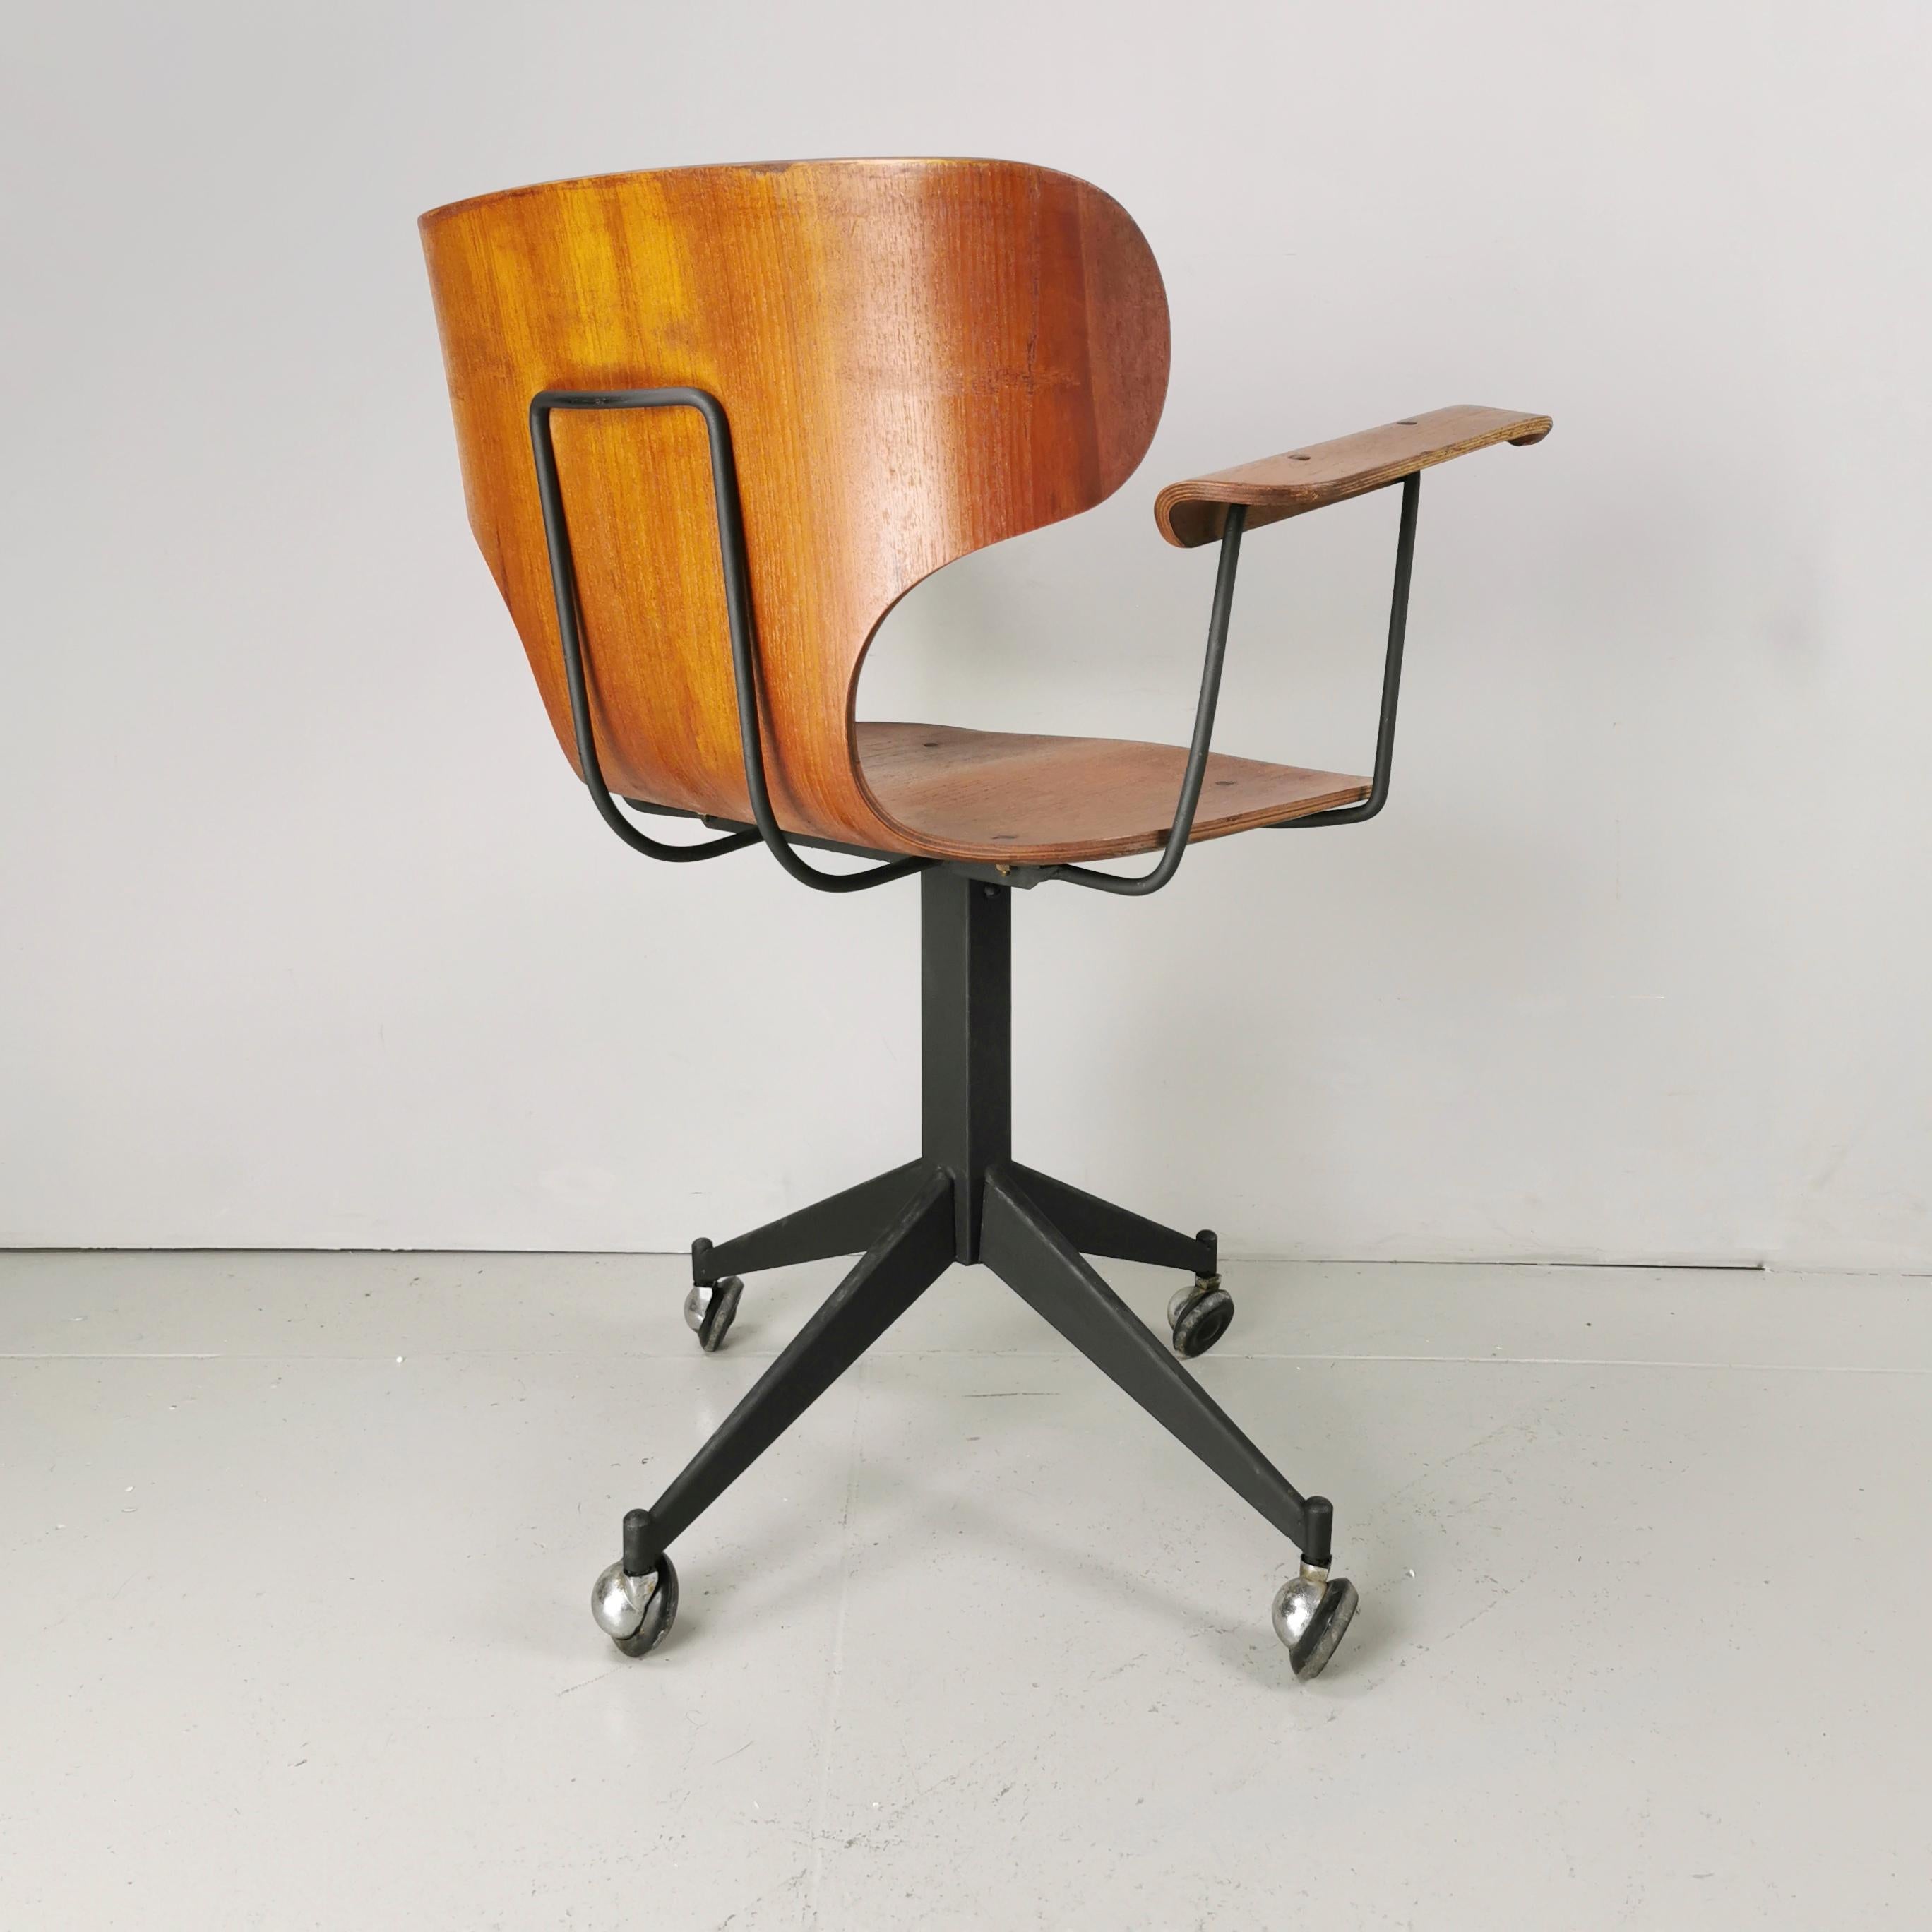 Other rare 50s/60s curved wood chair office desk For Sale